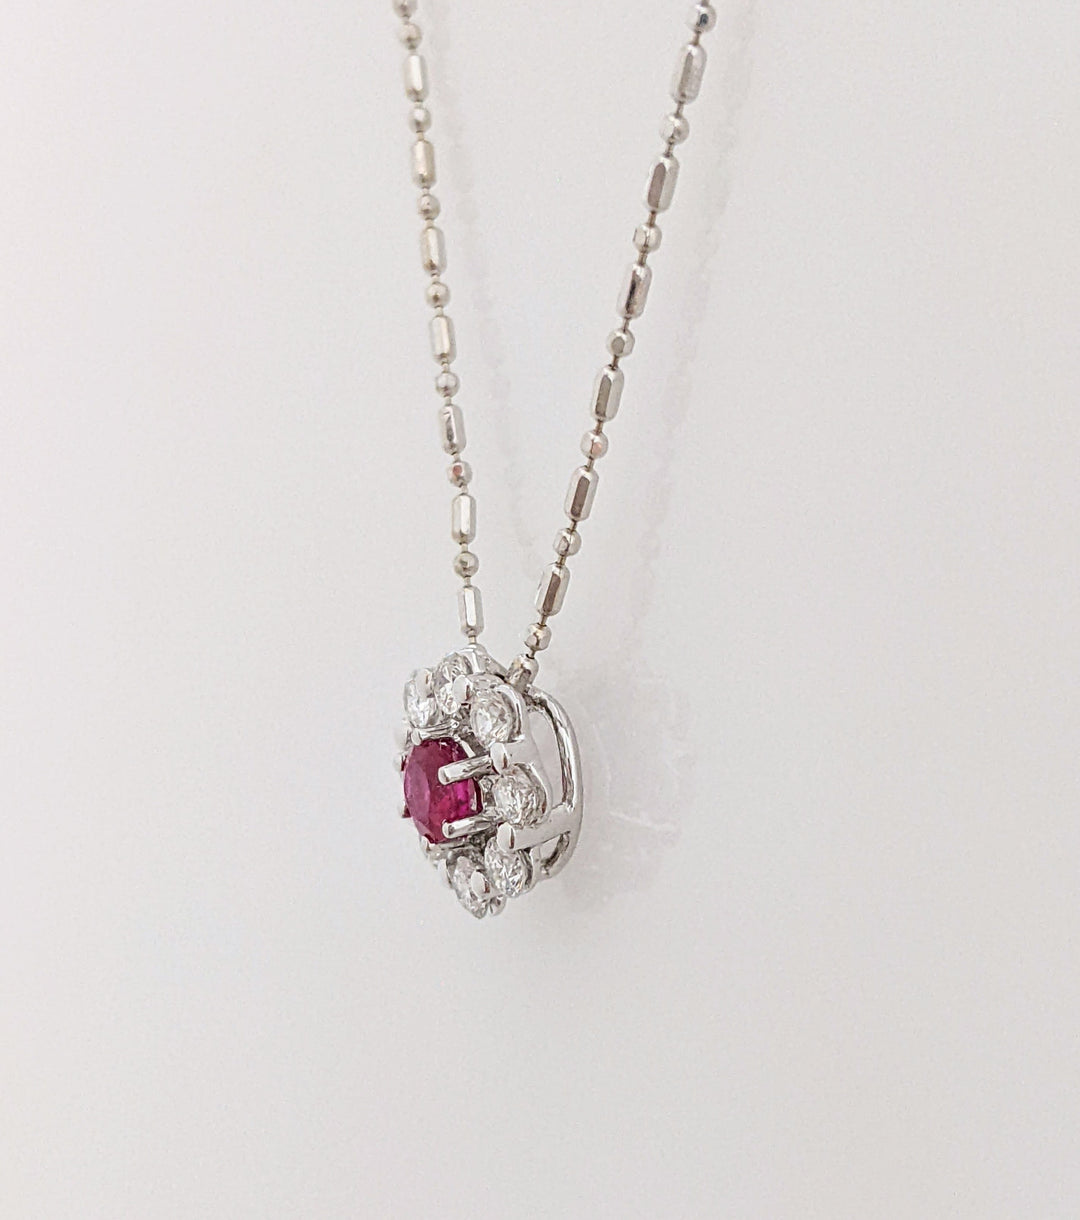 18K WHITE GOLD RUBY ROUND 4MM WITH (8) DIAMOND .32CTW SI2 G ESTATE PENDANT & CHAIN 3.0 GRAMS